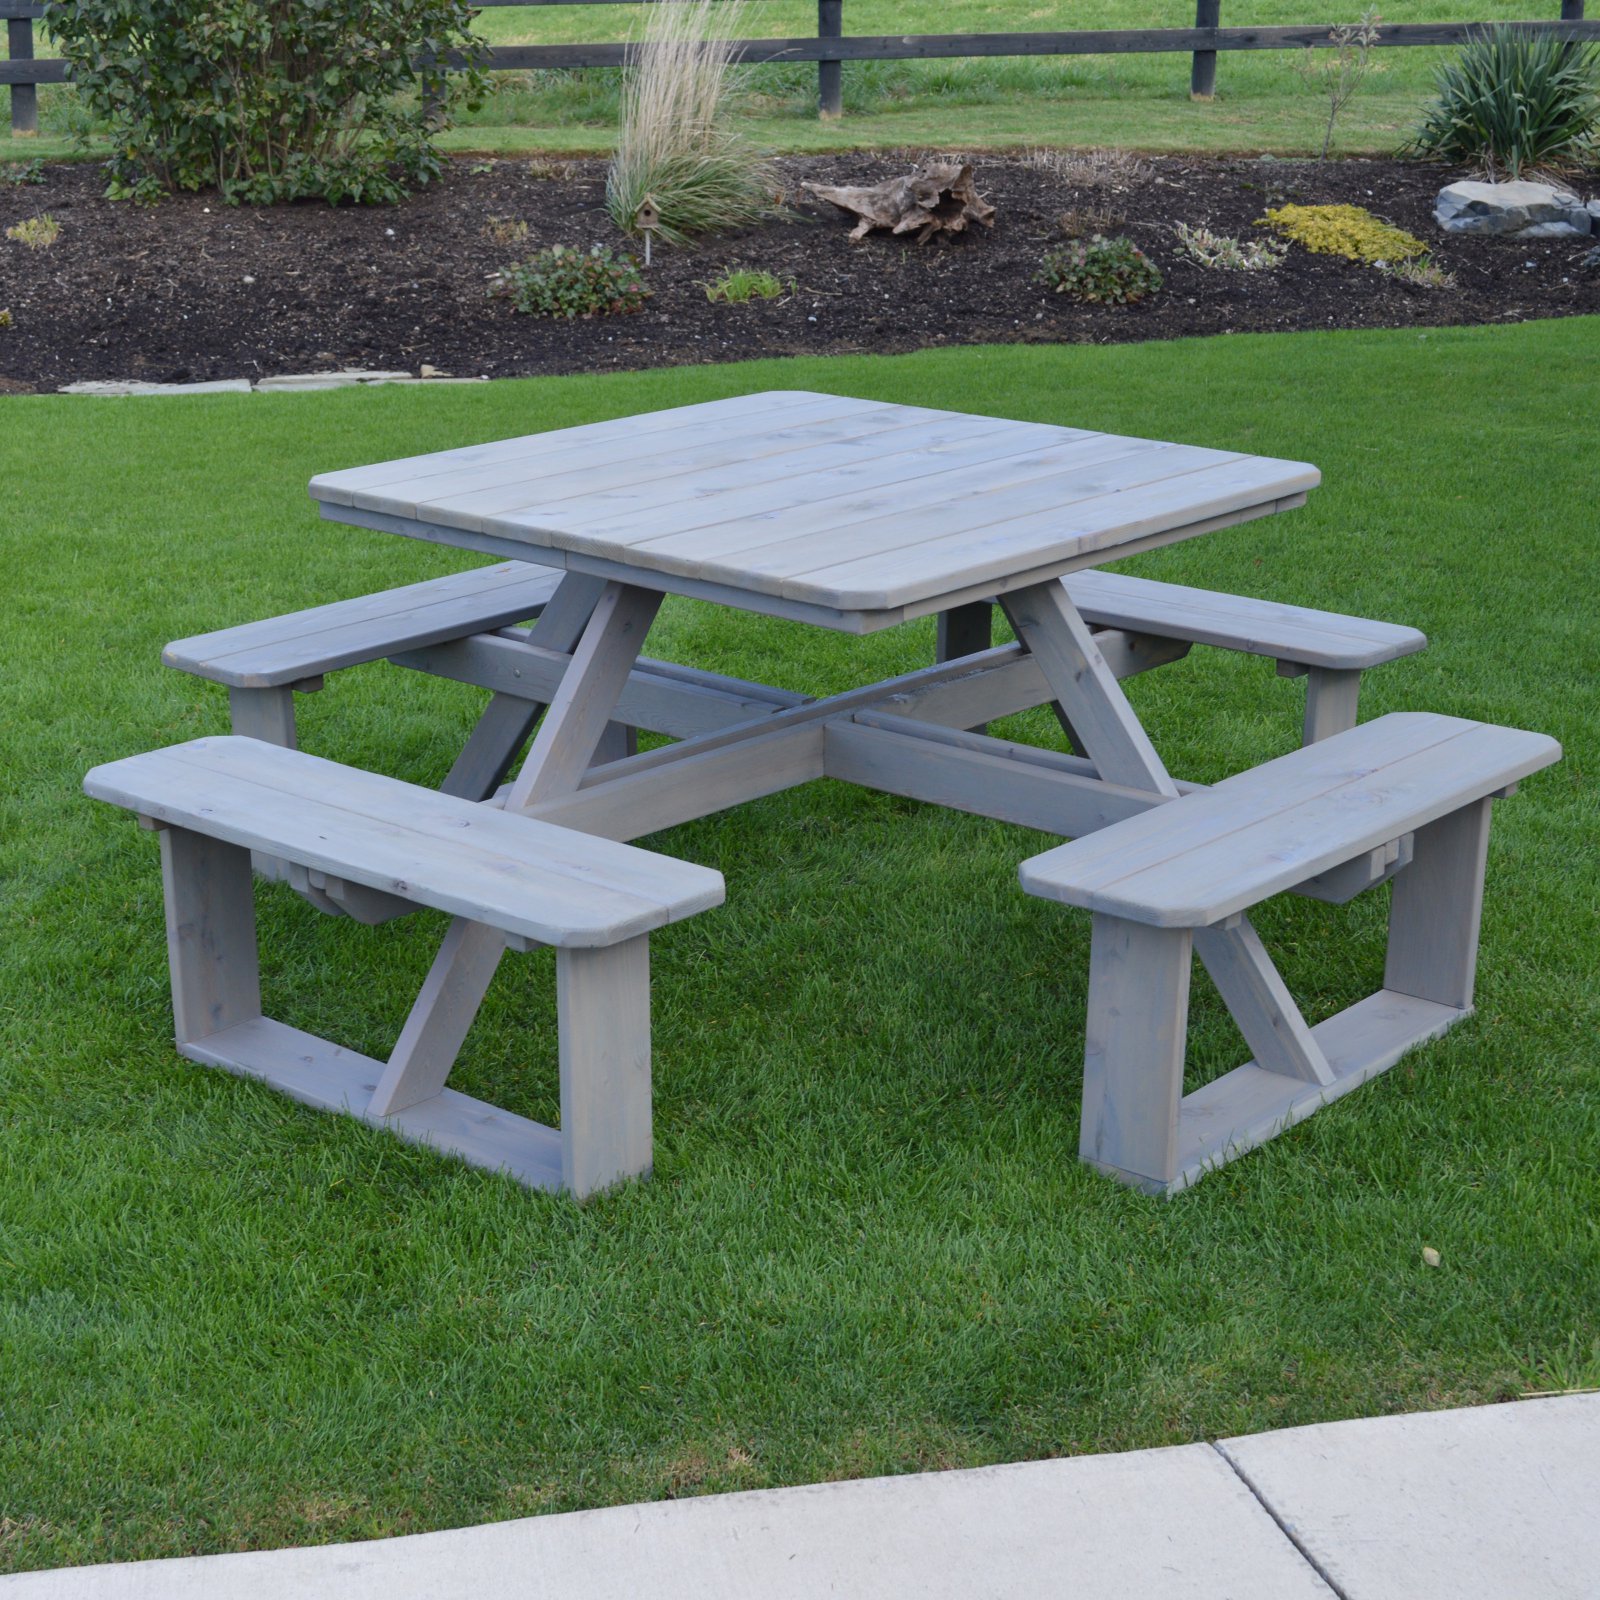 A &amp; L Furniture 44 in. Square Walk-In Wood Picnic Table with Optional Umbrella Hole - image 1 of 2